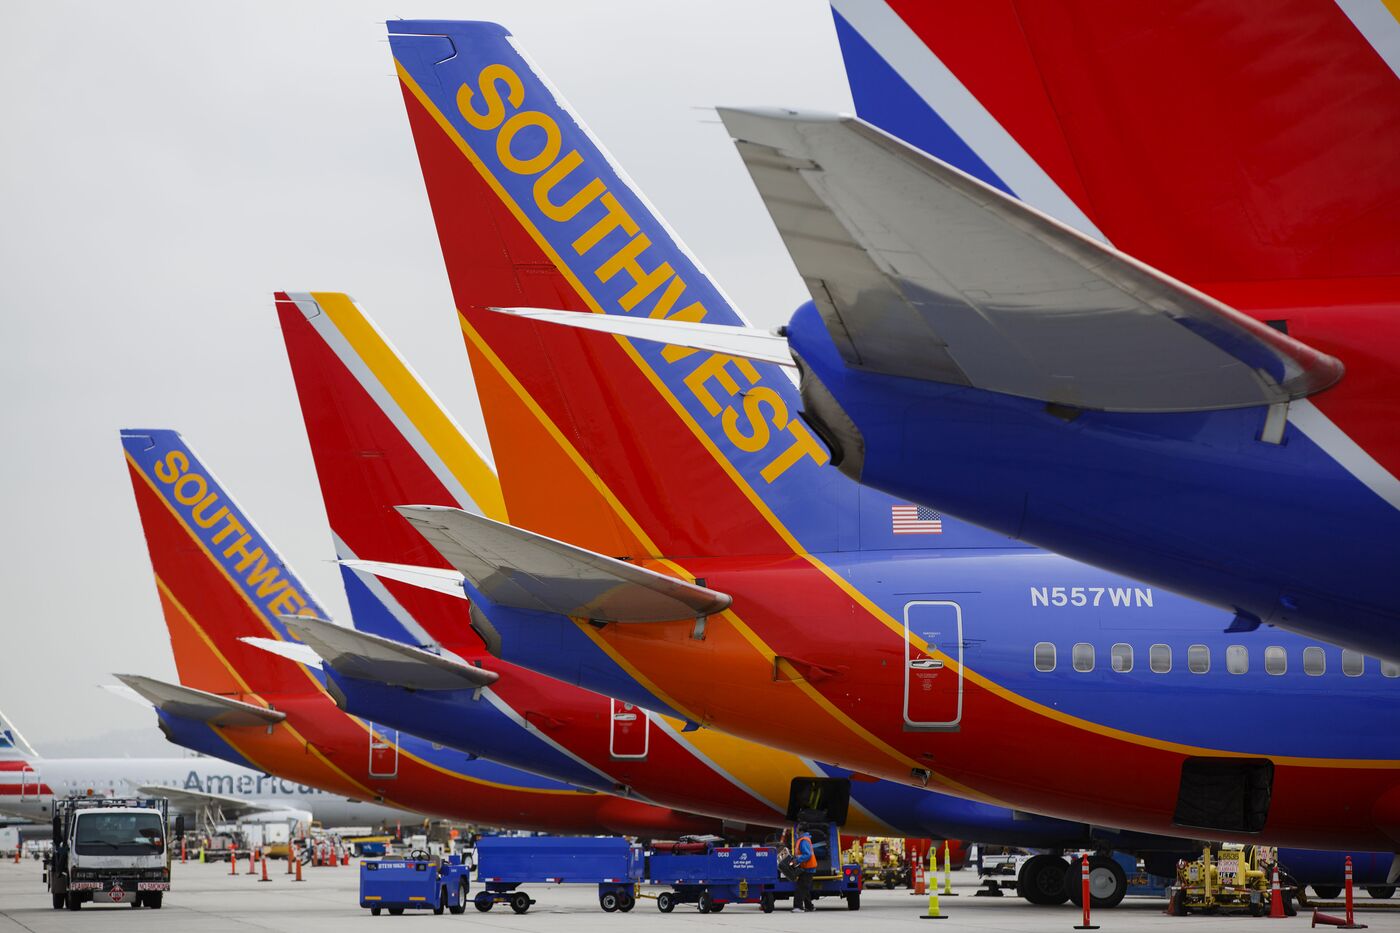 Southwest Air Limits Emotional-Support Animals to Dogs and Cats - Bloomberg